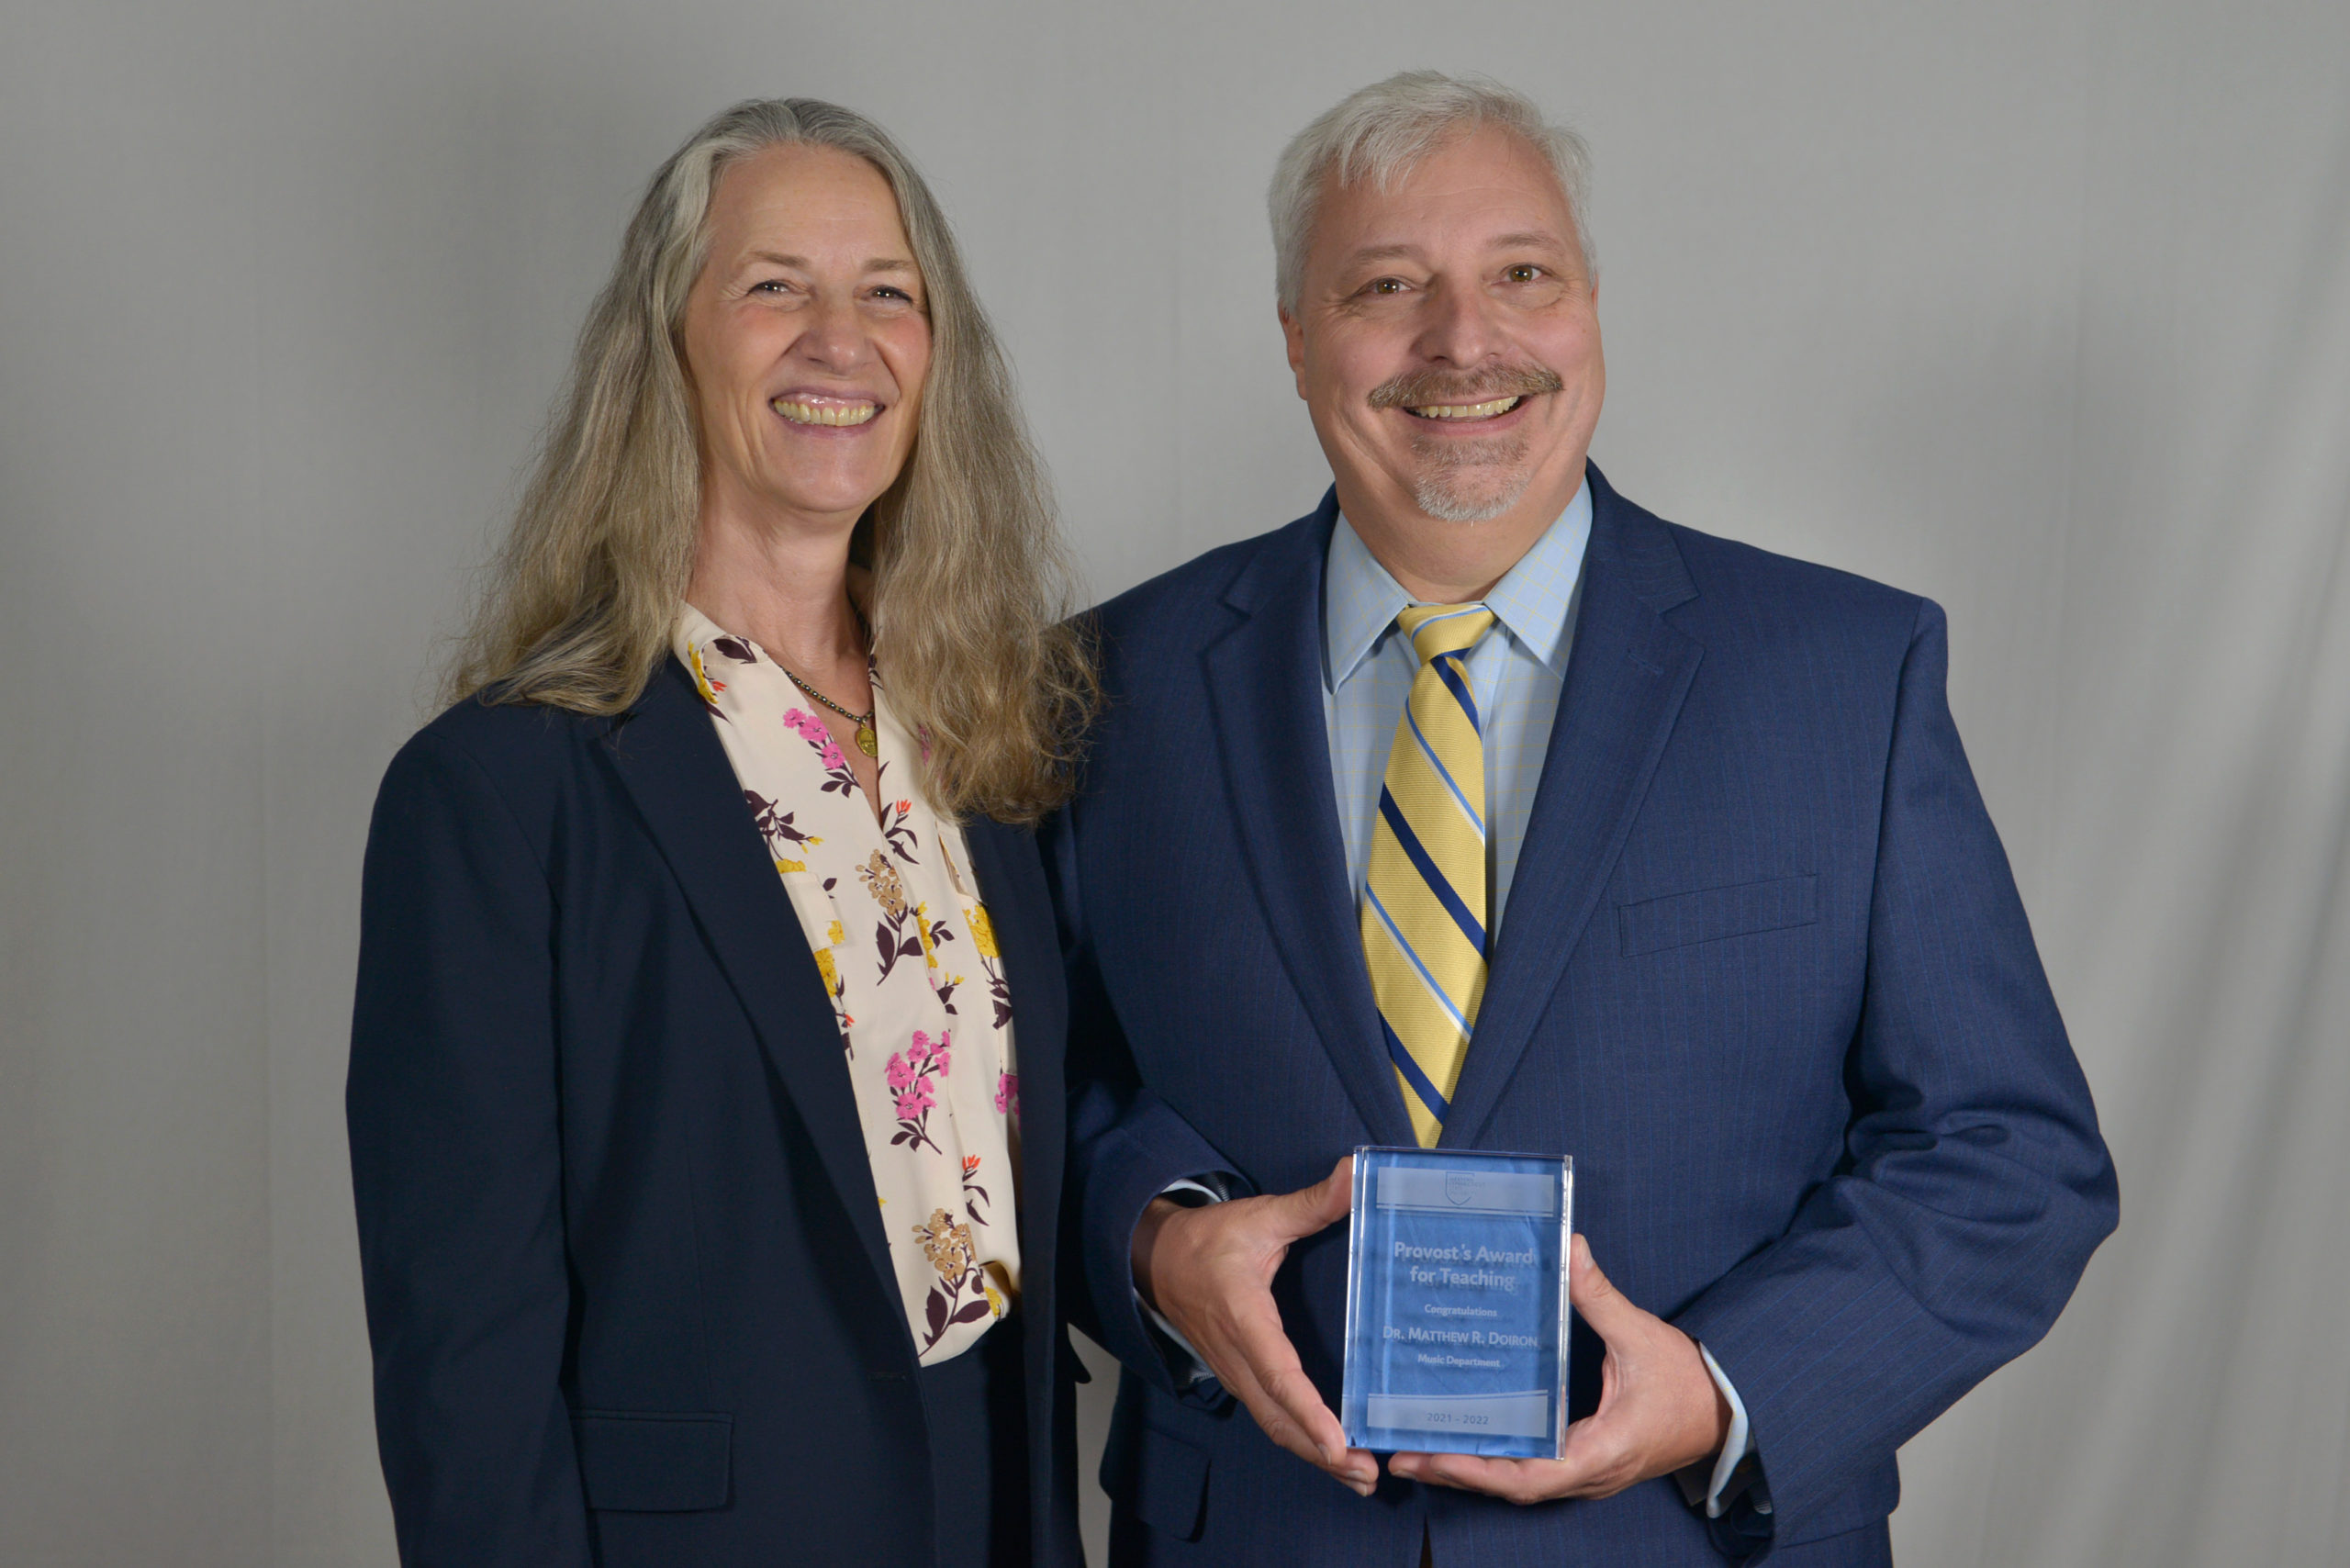 (l-r): Provost Dr. Missy Alexander with 2022 Provost's Award for Teaching recipient Dr. Matthew Doiron